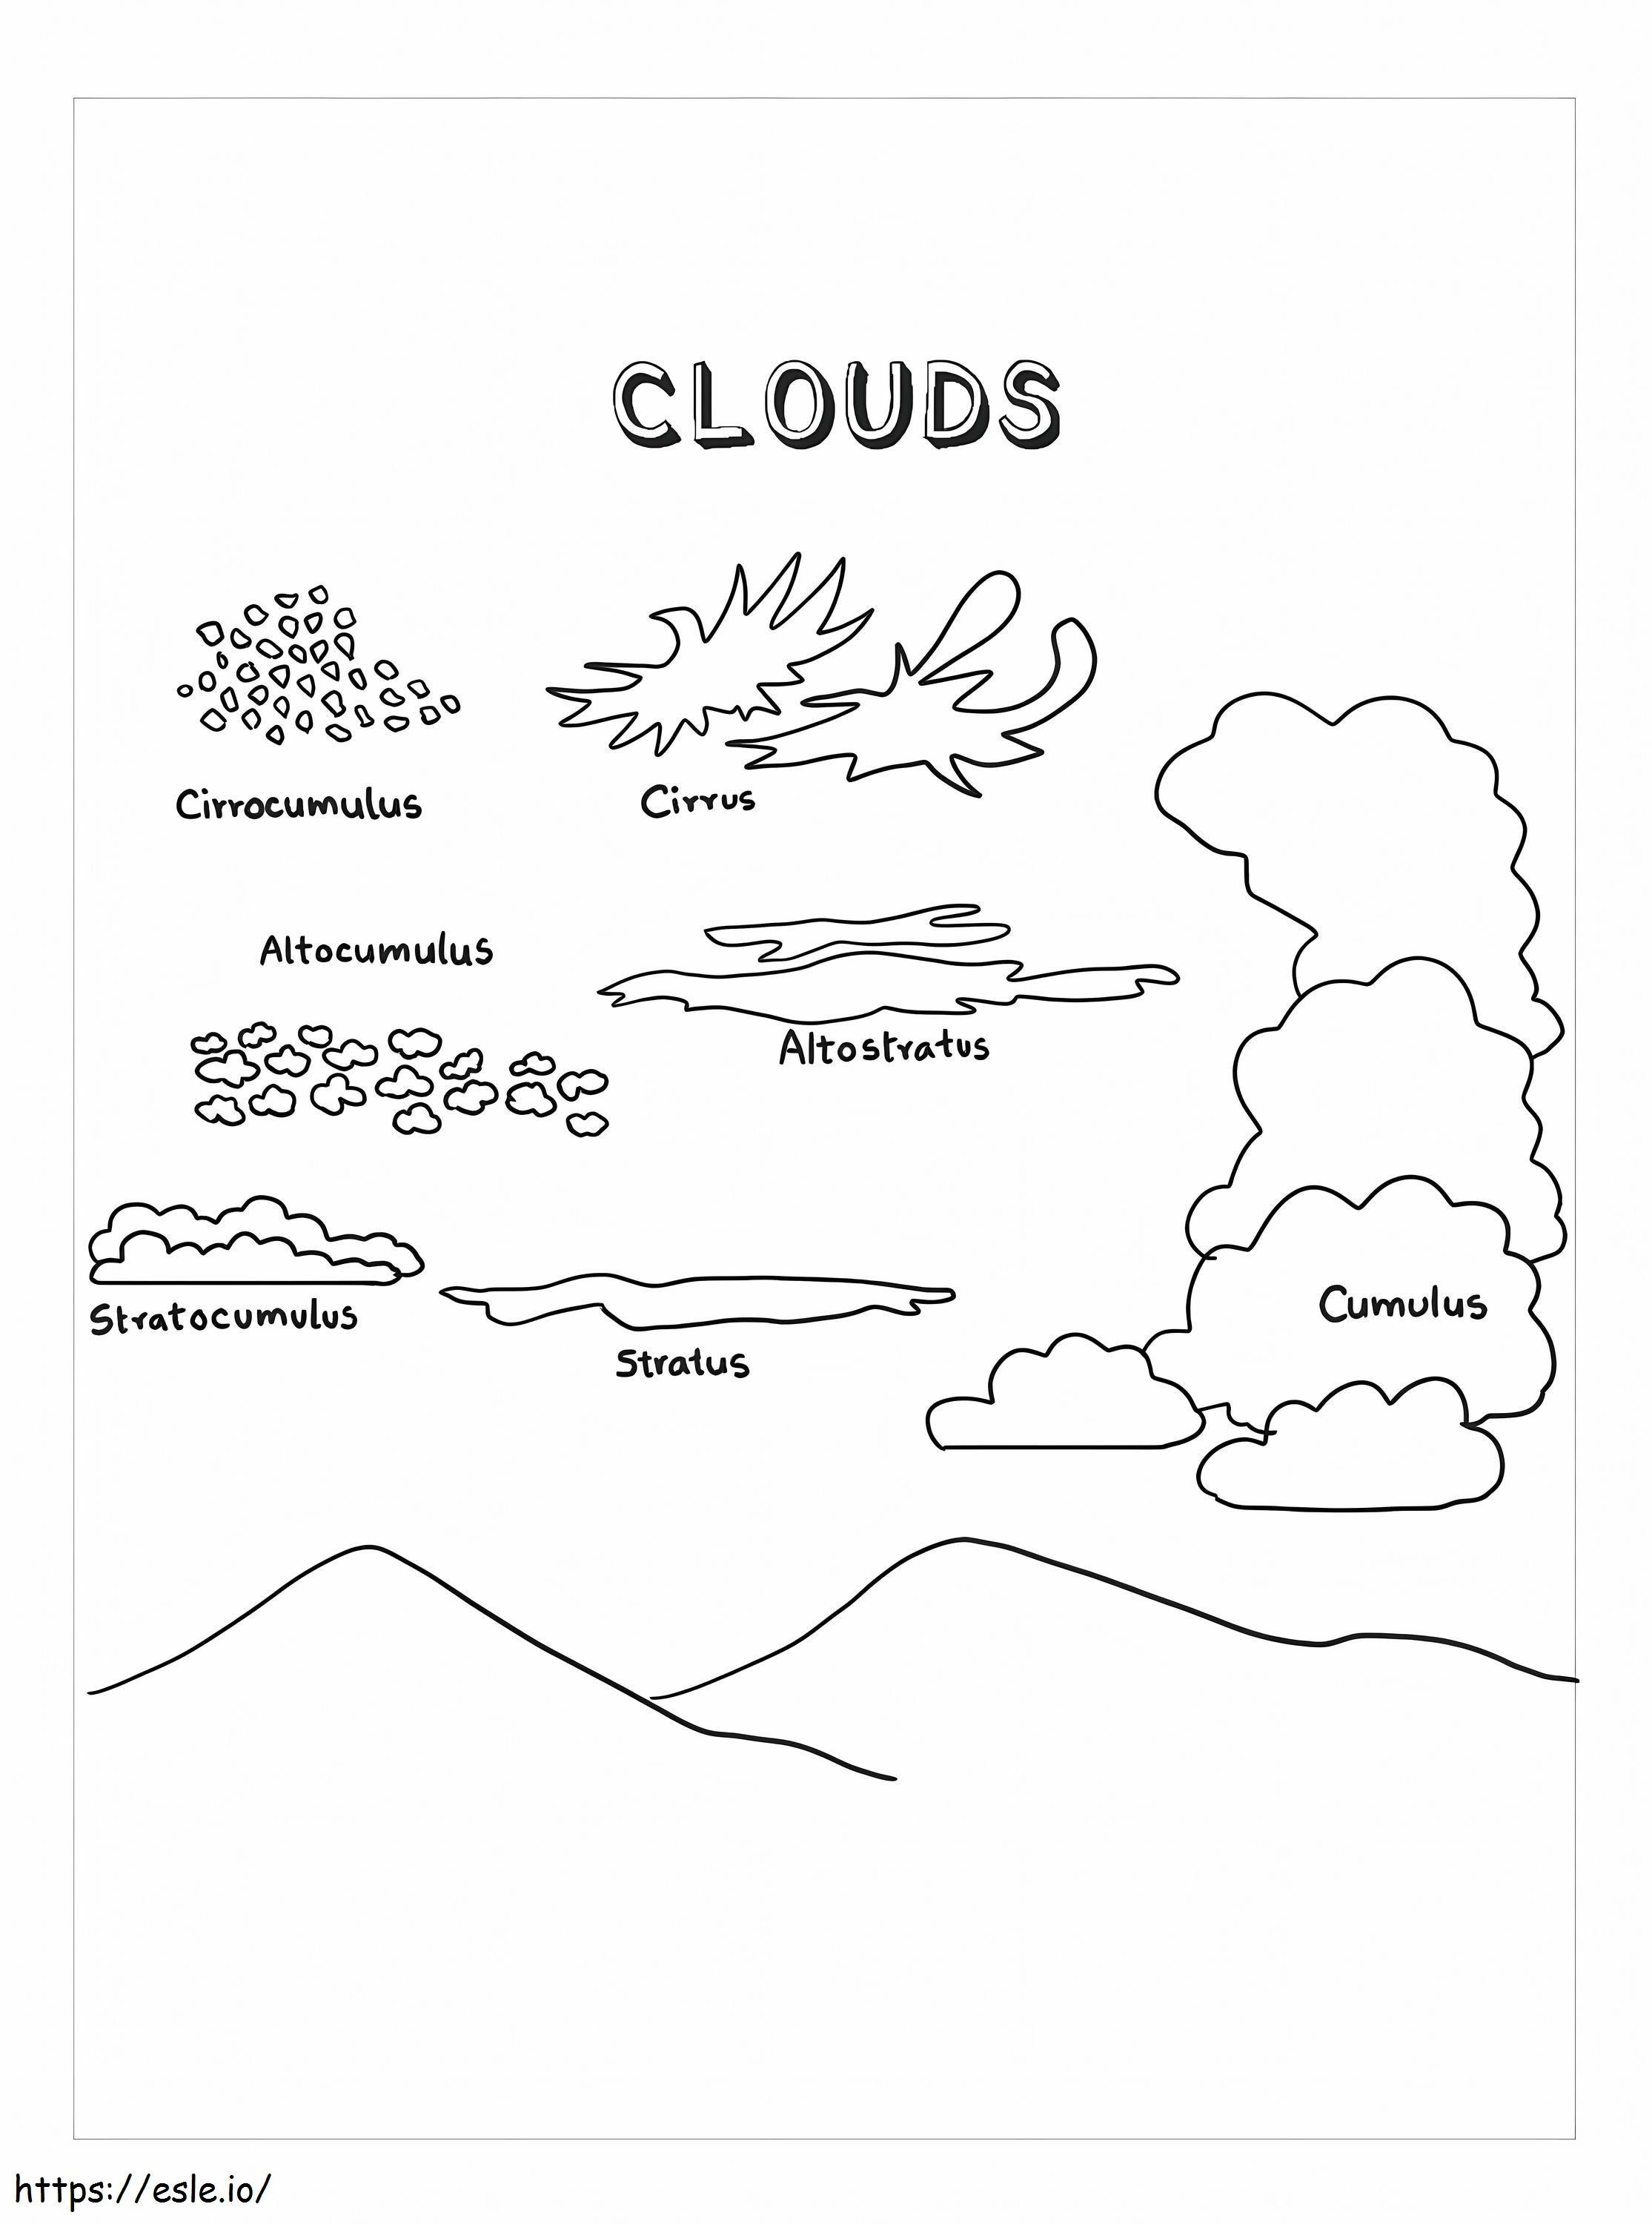 Cloud Types coloring page